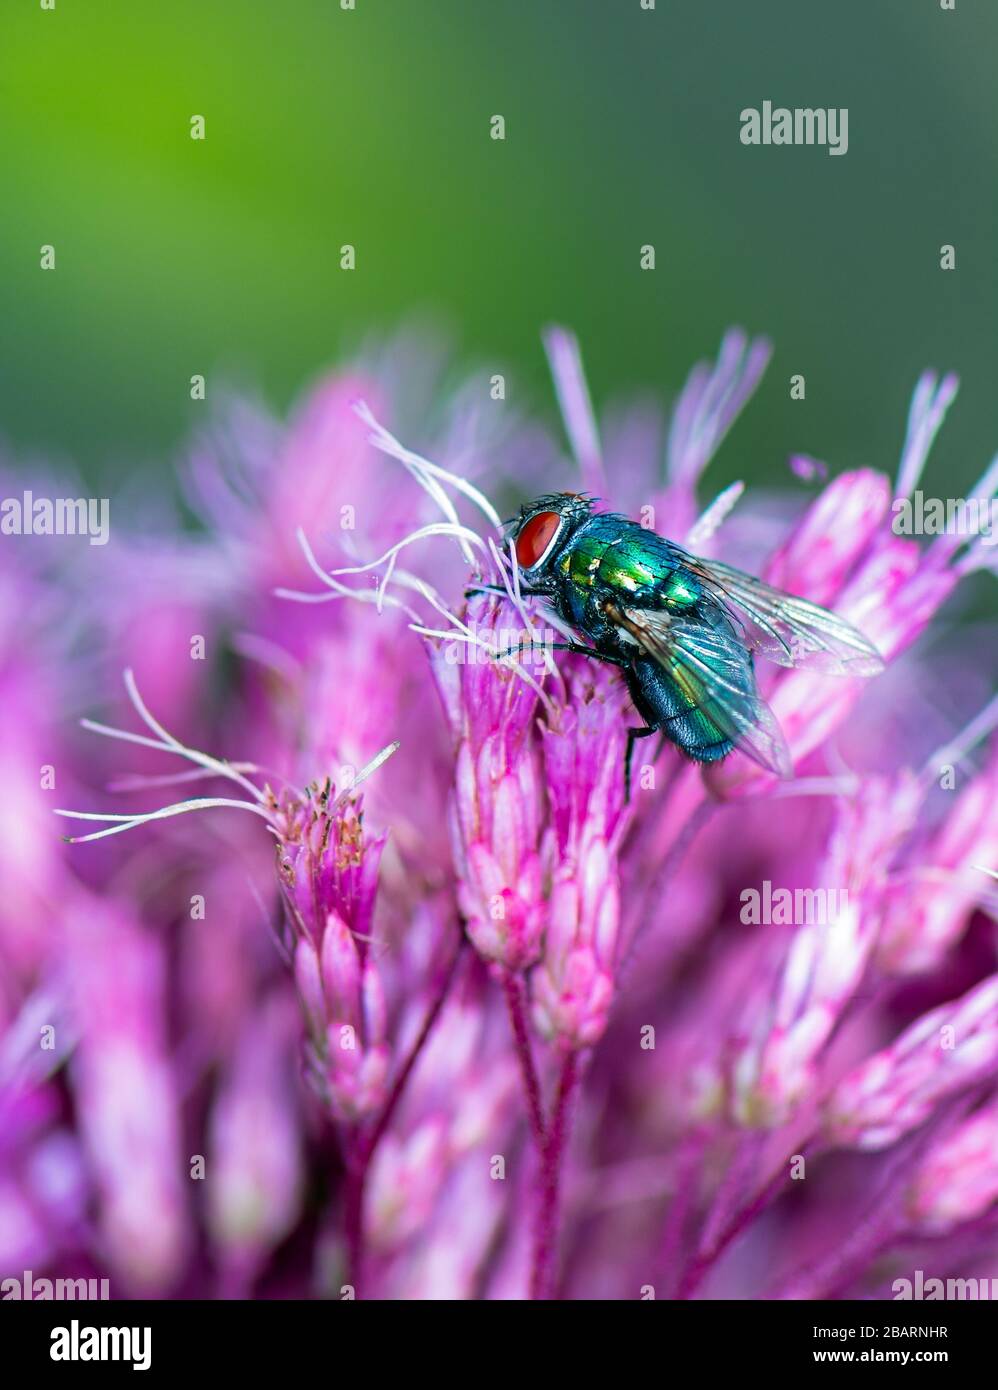 Insect macro of a fly on a pink flower blossom Stock Photo